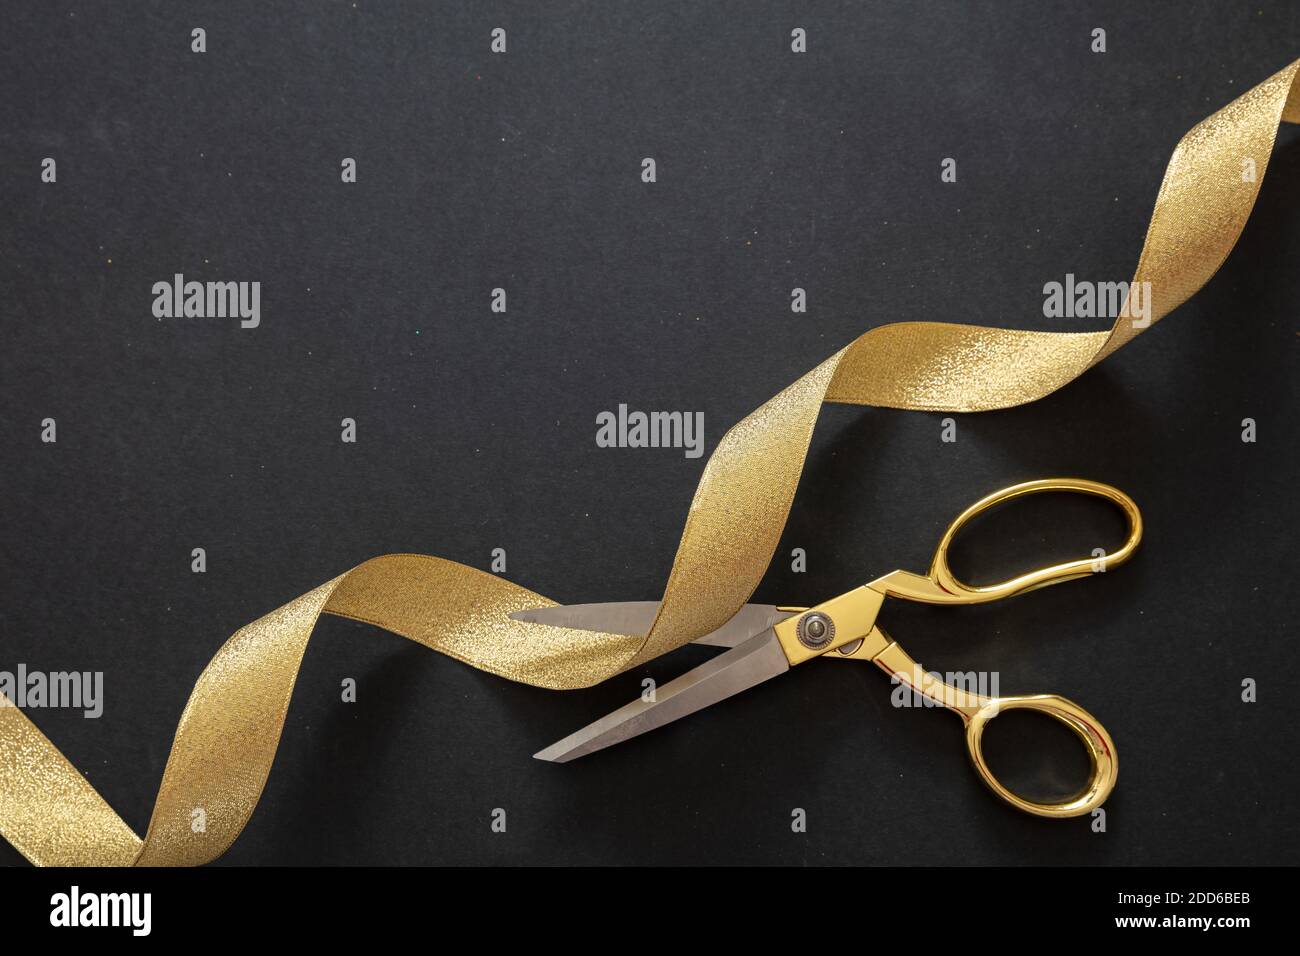 Grand opening. Gold scissors cutting golden silk ribbon, black background, top view. Invitation template, copy space Stock Photo